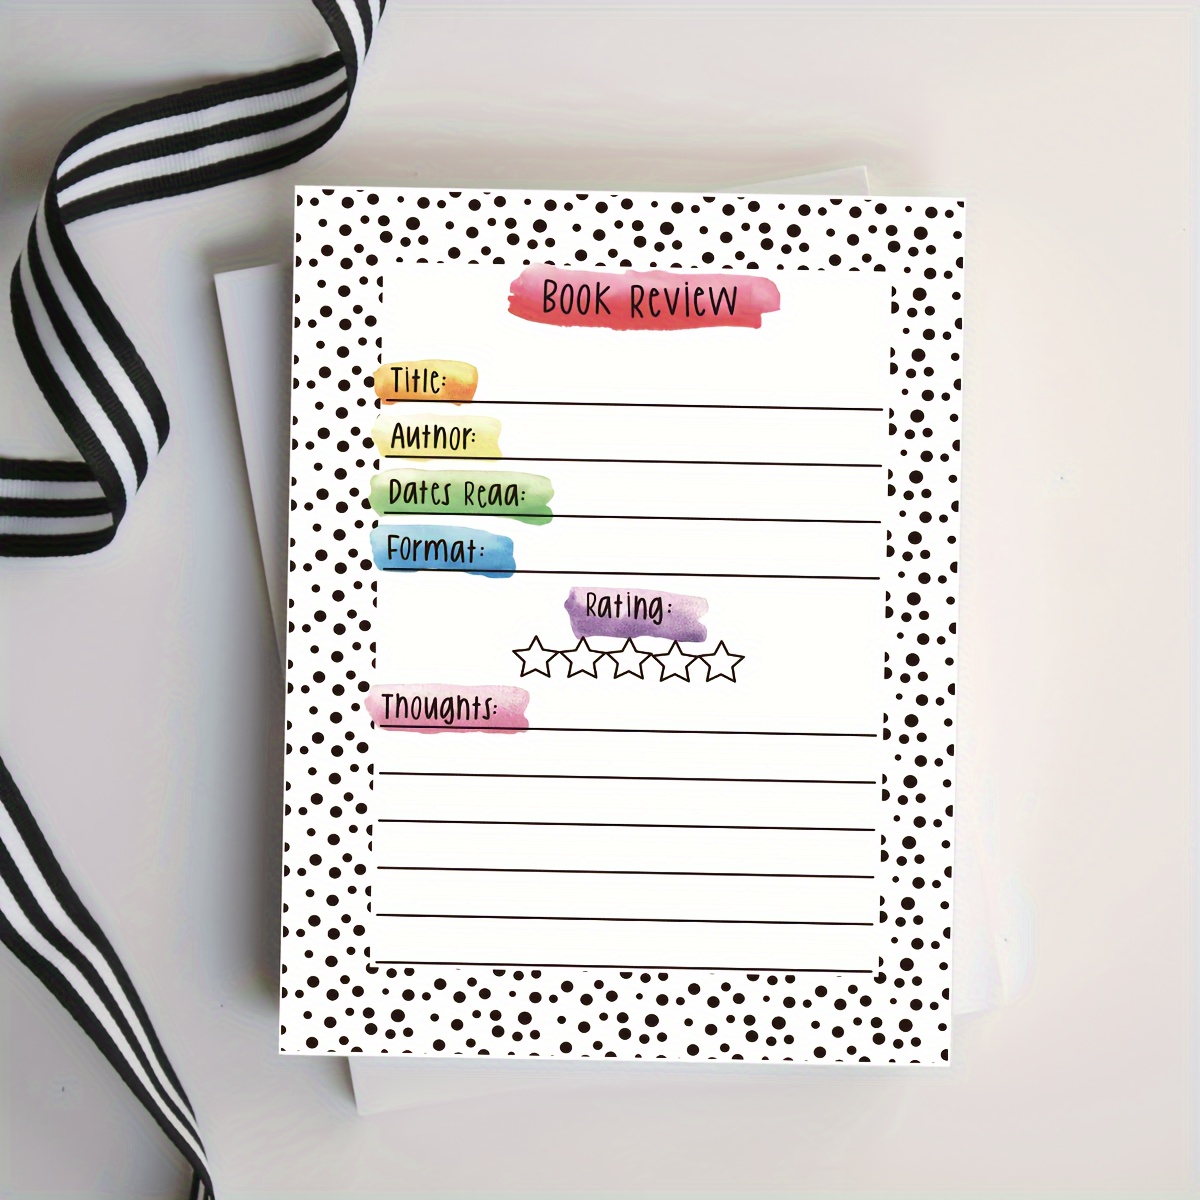 

50 Book Review Notebooks - 4x5.5 Inches, Tear-off Table Tents, Star Rating, Bookworm Gift, Office Supplies, English Text